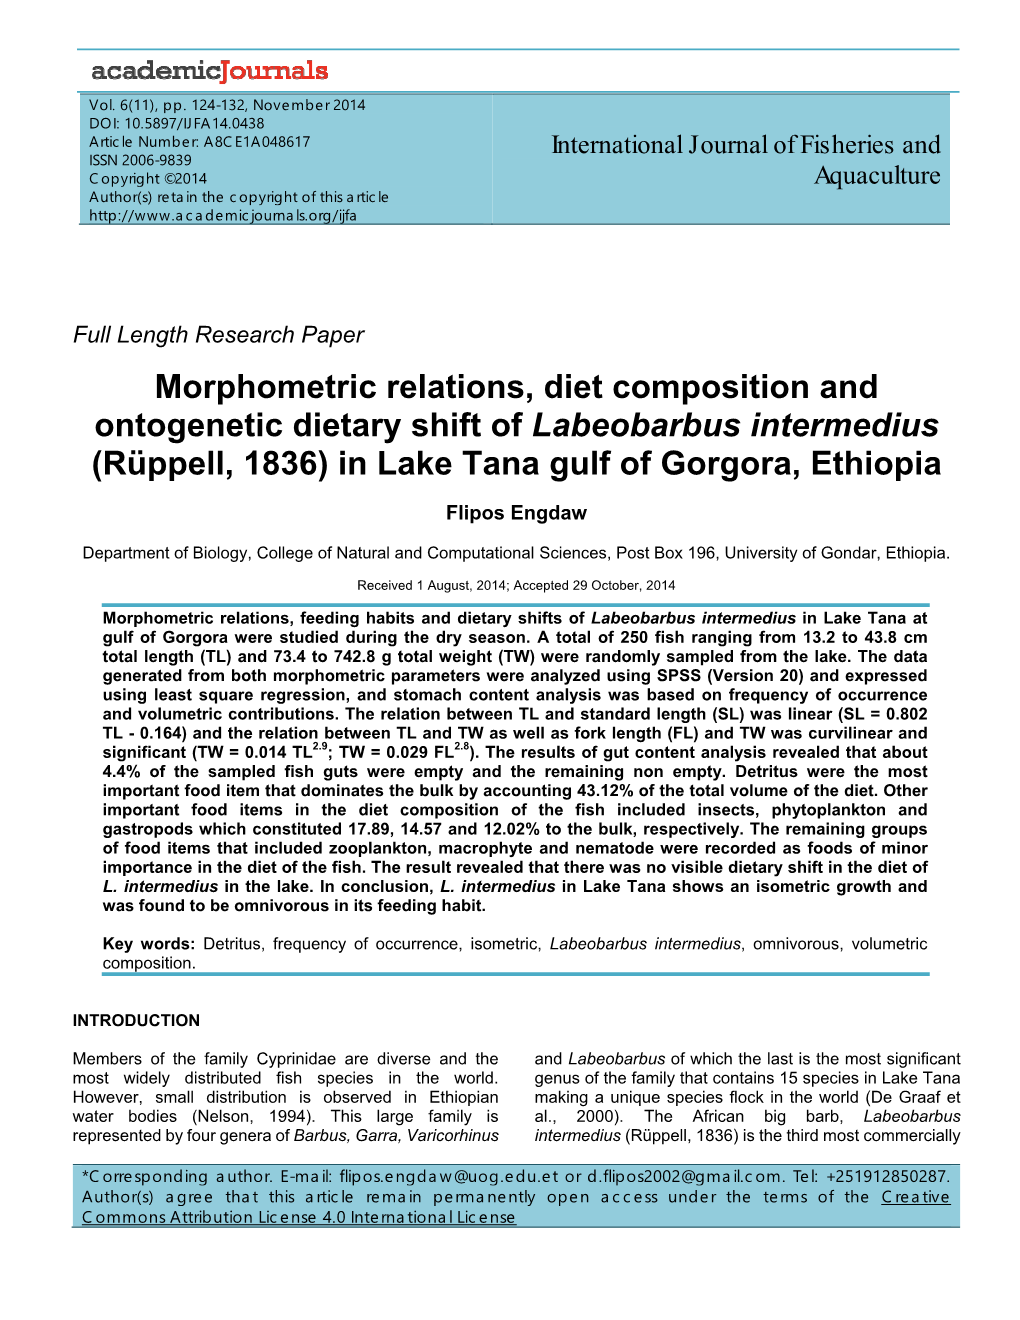 Morphometric Relations, Diet Composition and Ontogenetic Dietary Shift of Labeobarbus Intermedius (Rüppell, 1836) in Lake Tana Gulf of Gorgora, Ethiopia